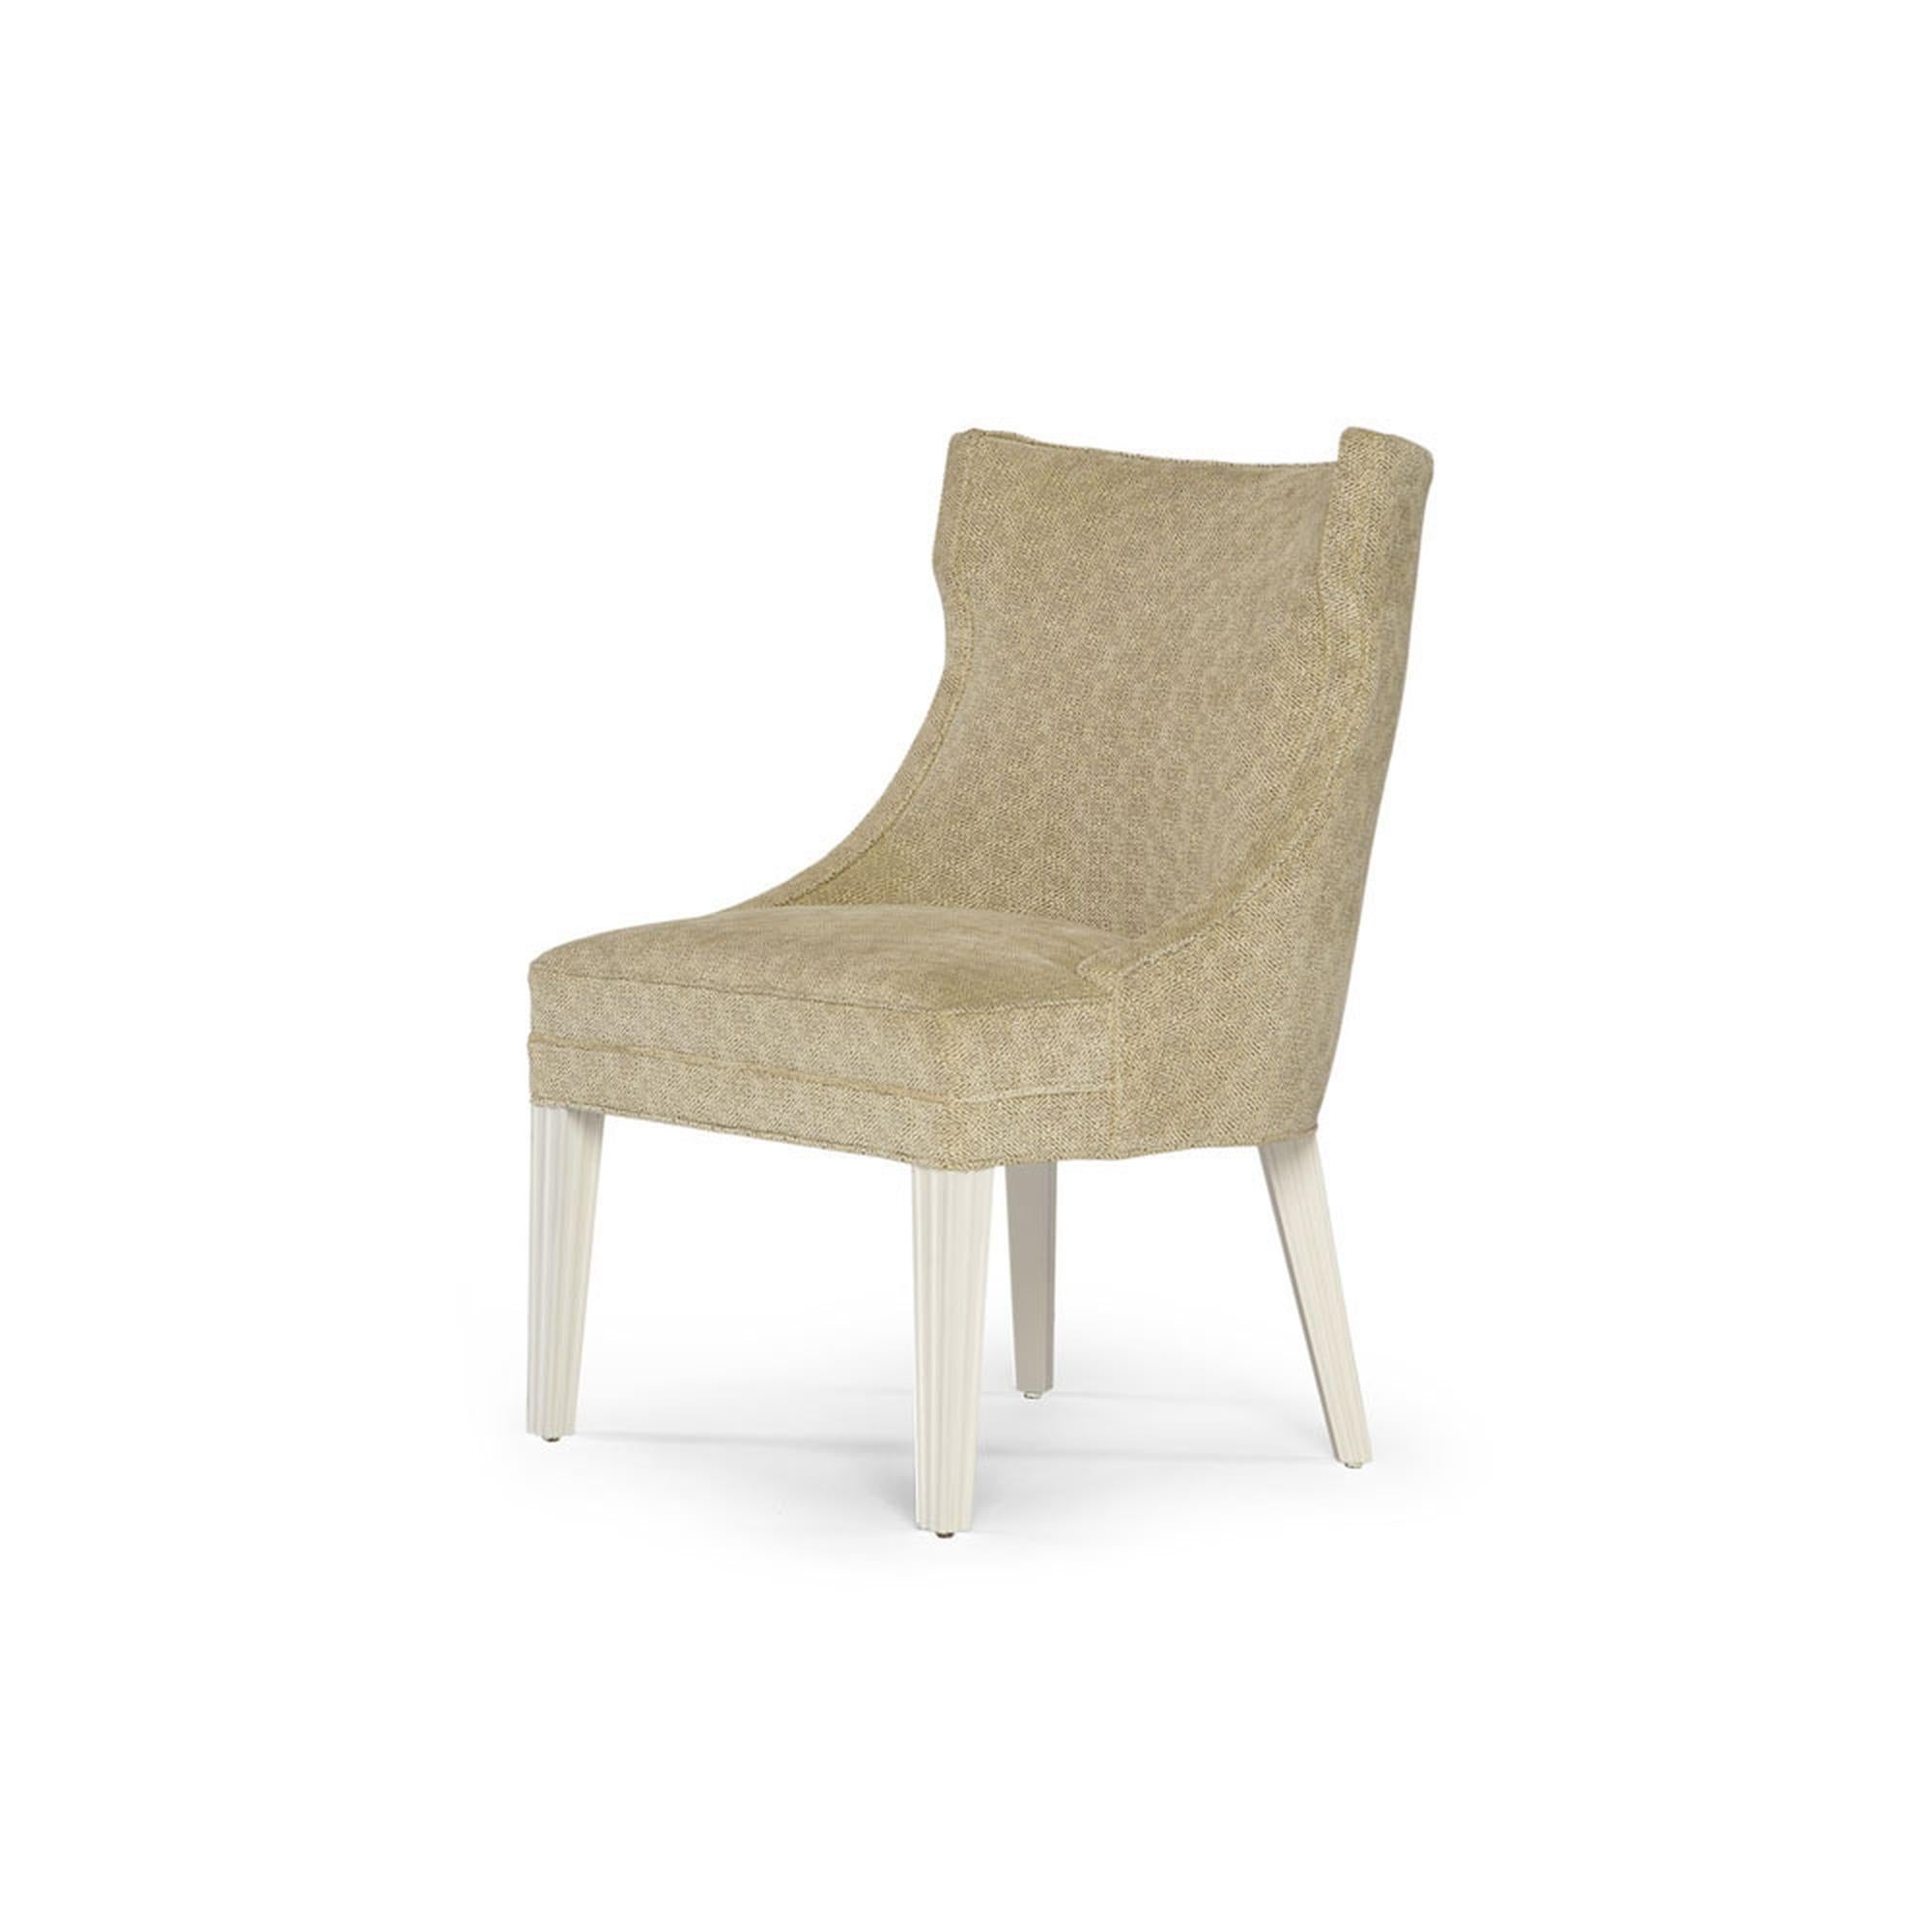 Contemporary Balboa Dining Chair in Beige with Lacquered White Legs by Innova Luxuxy Group For Sale